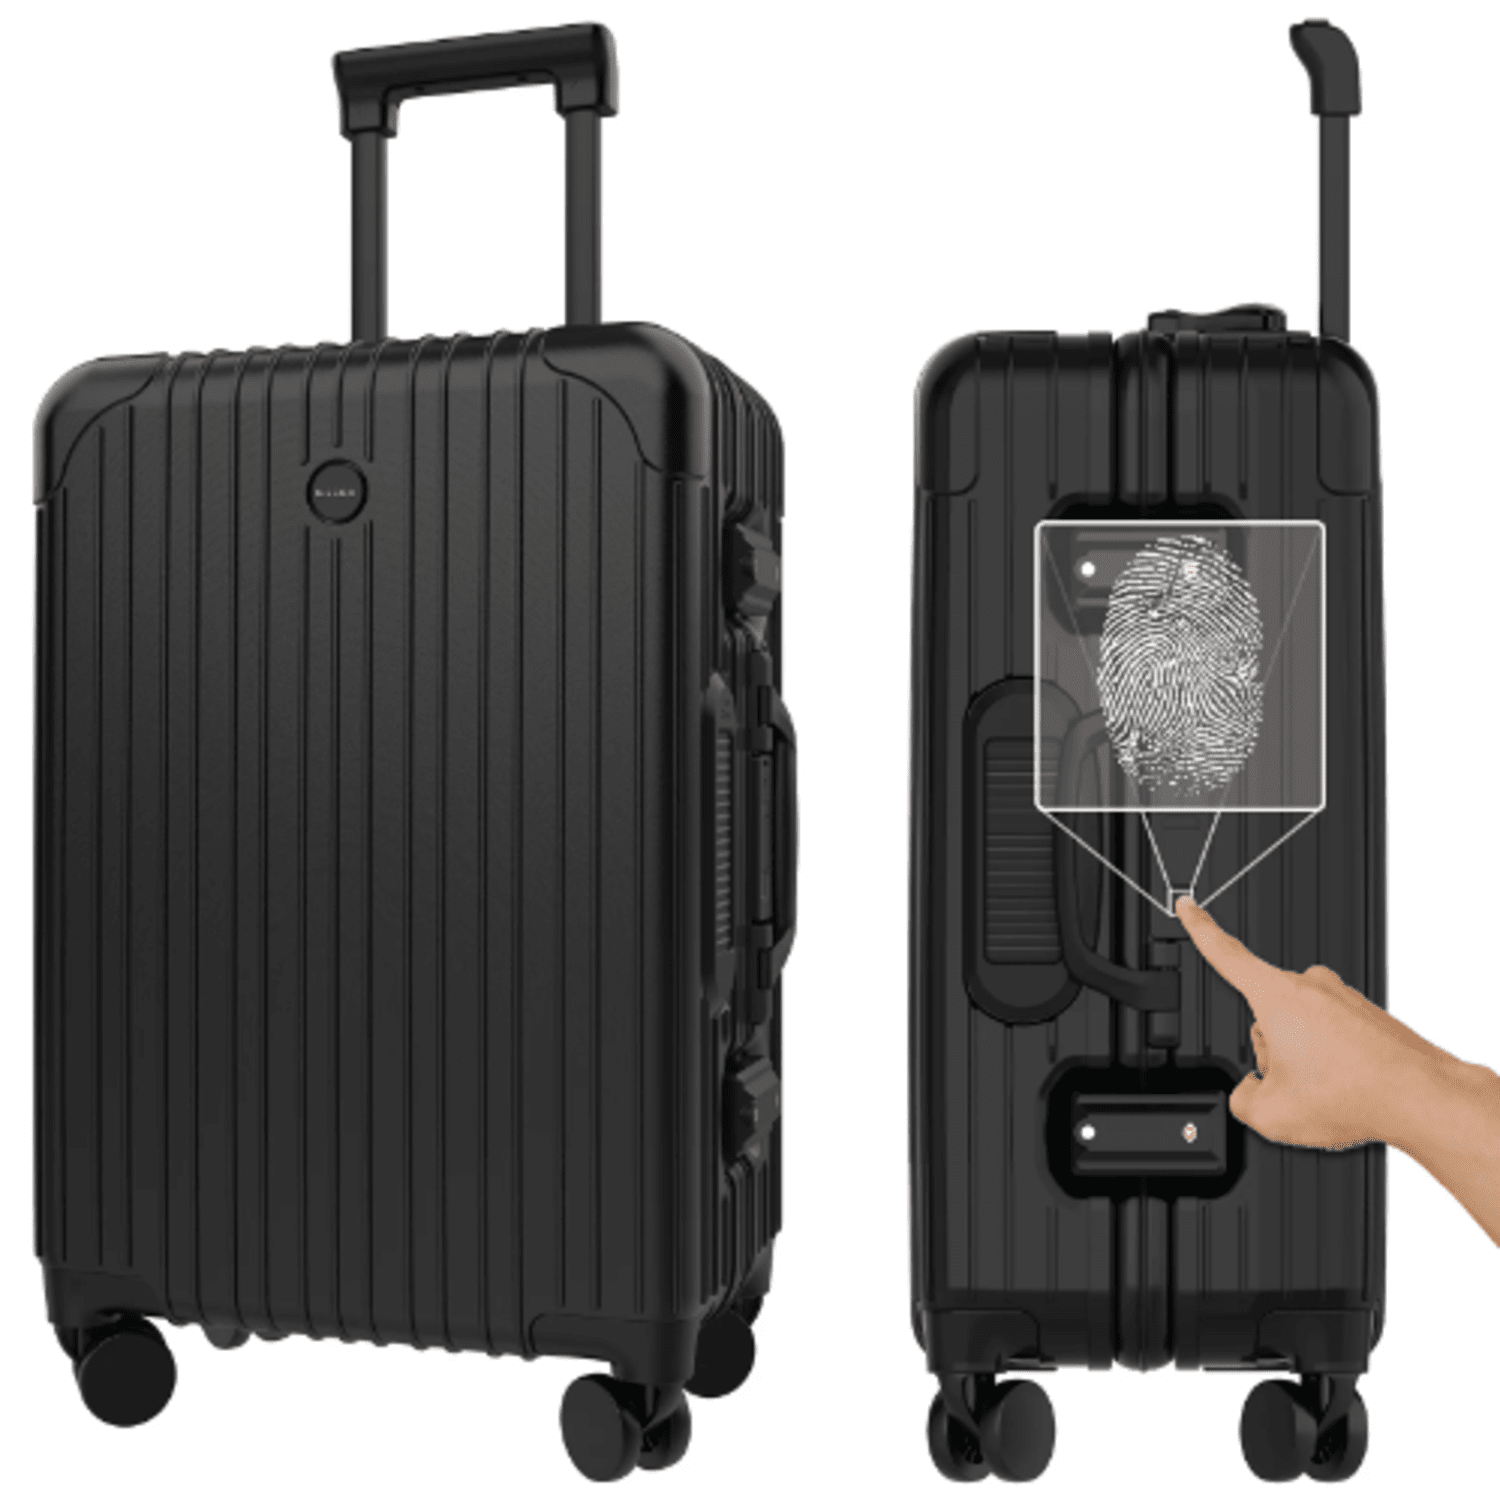 Samsara Tag Smart AirTag Luggage review: Excellent trackable